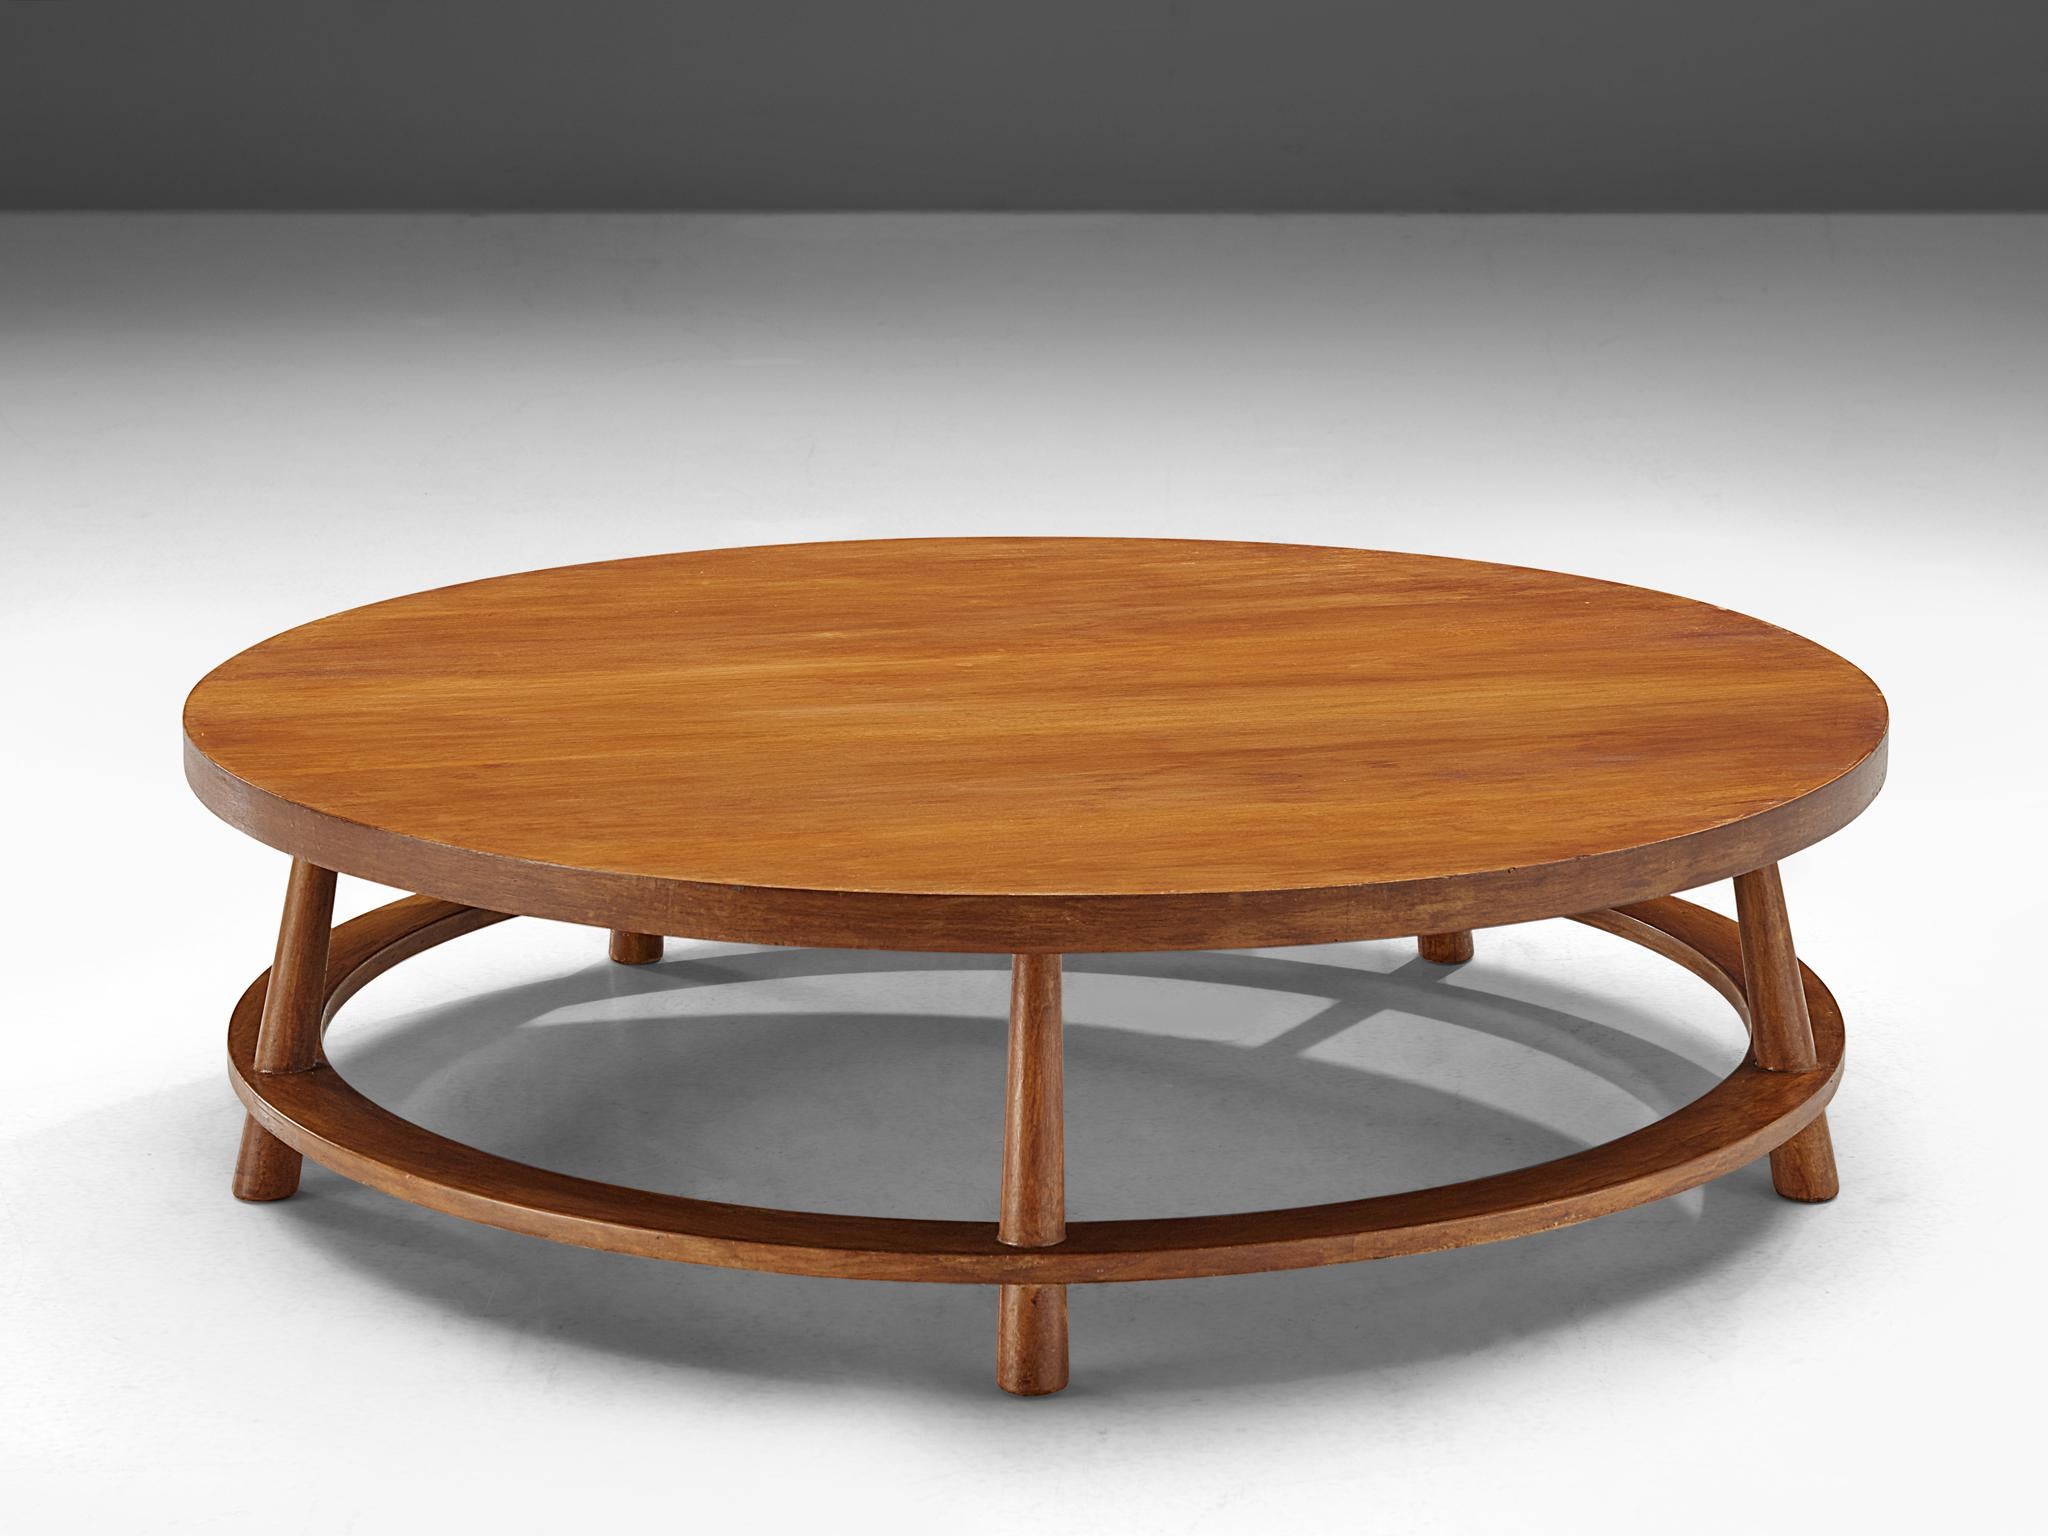 T.H. Robsjohn-Gibbings for Widdicomb, coffee table '48', walnut, United States, 1948.

This round coffee table is designed by Robsjohn-Gibbings for Widdicomb in 1948. The table features a solid walnut frame and a walnut top. It stands on five